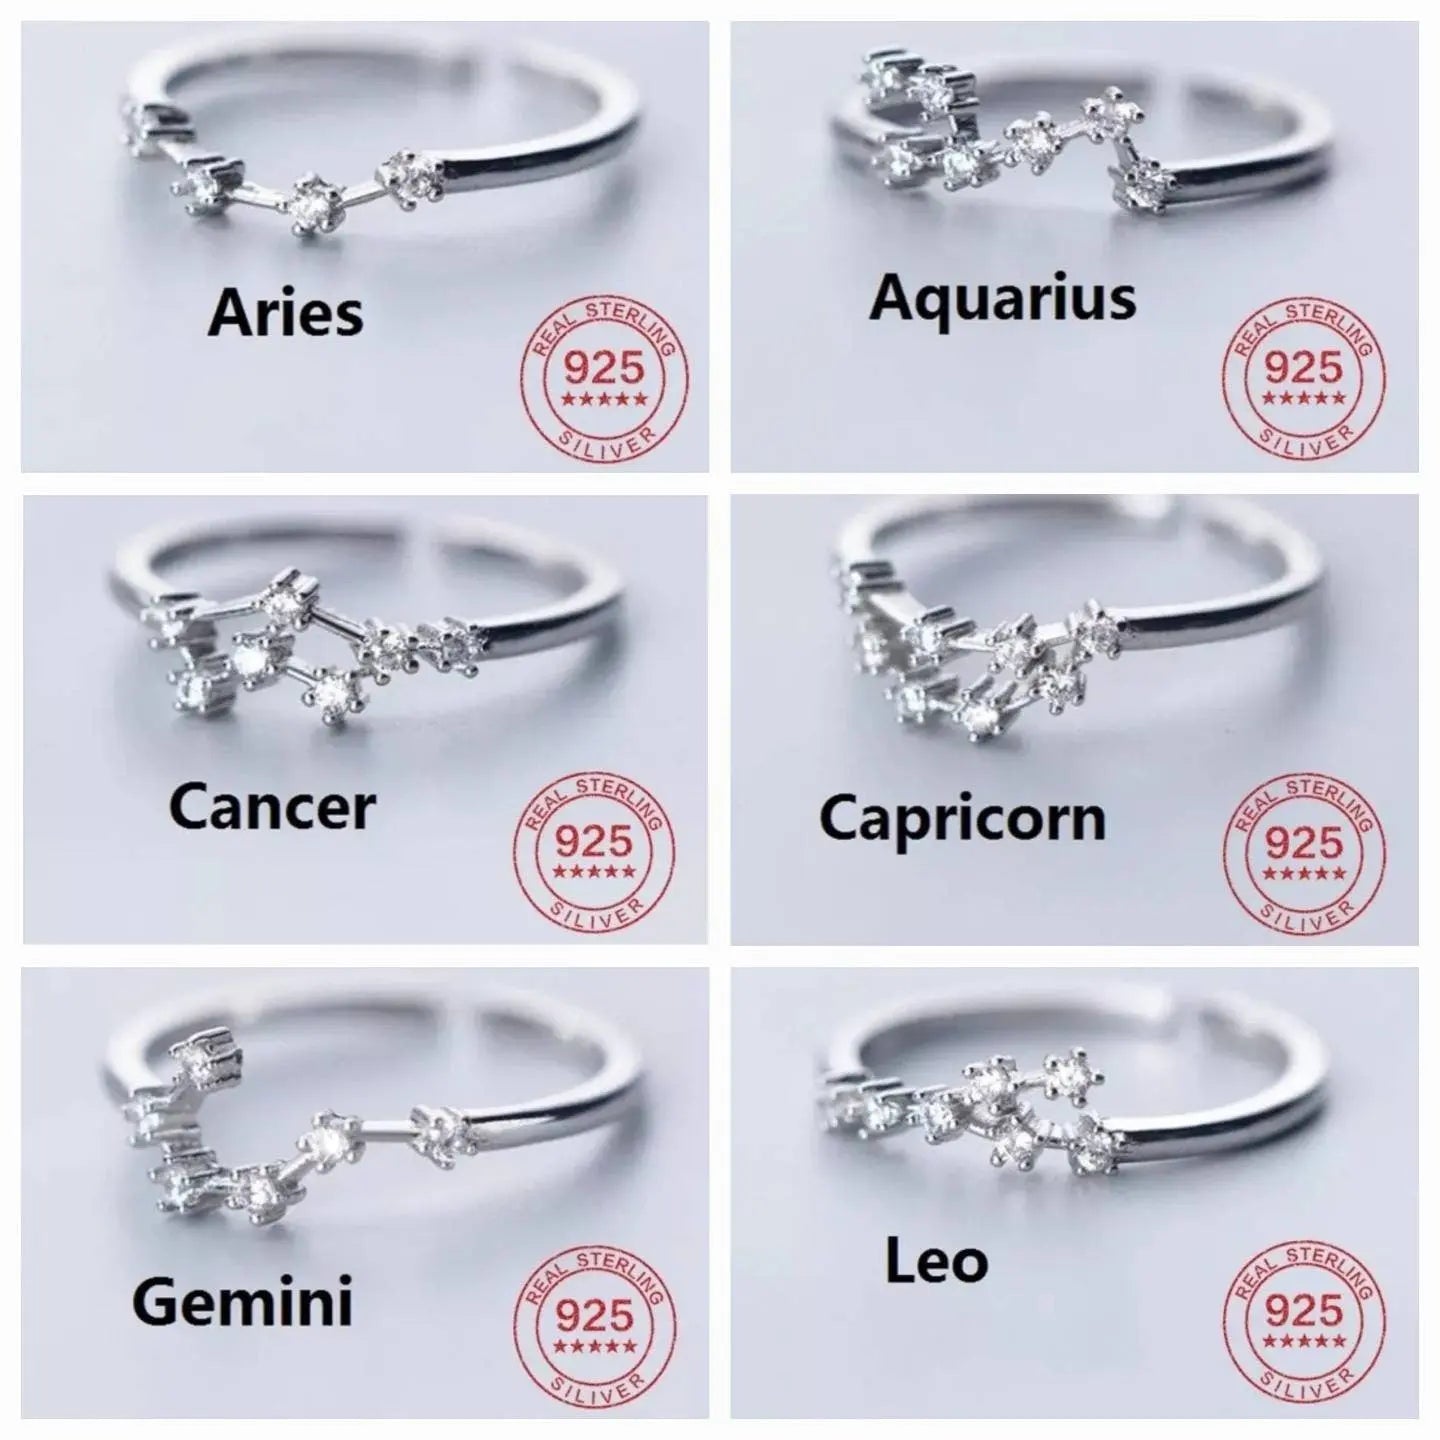 12 Constellation Ring Sterling Silver Cubic Zirconia Adjustable Open Ring CZ Zodiac Middle Finger Pinky Ring Size 4.25-8 JettsJewelers